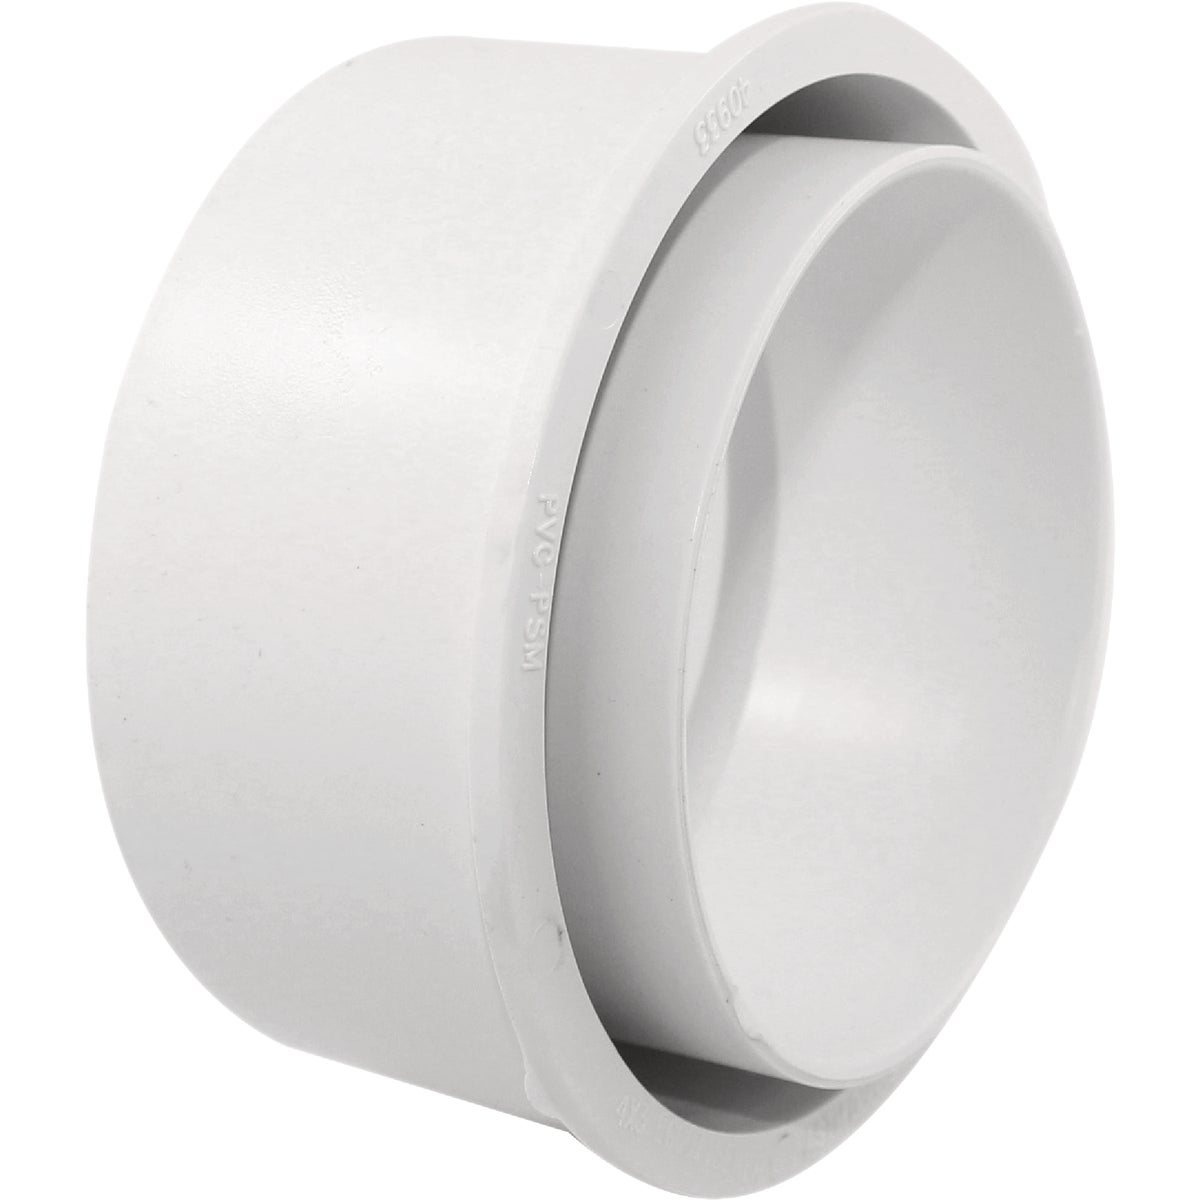 IPEX Canplas SDR 35 4 In. x 3 In. PVC Sewer and Drain Reducer Bushing